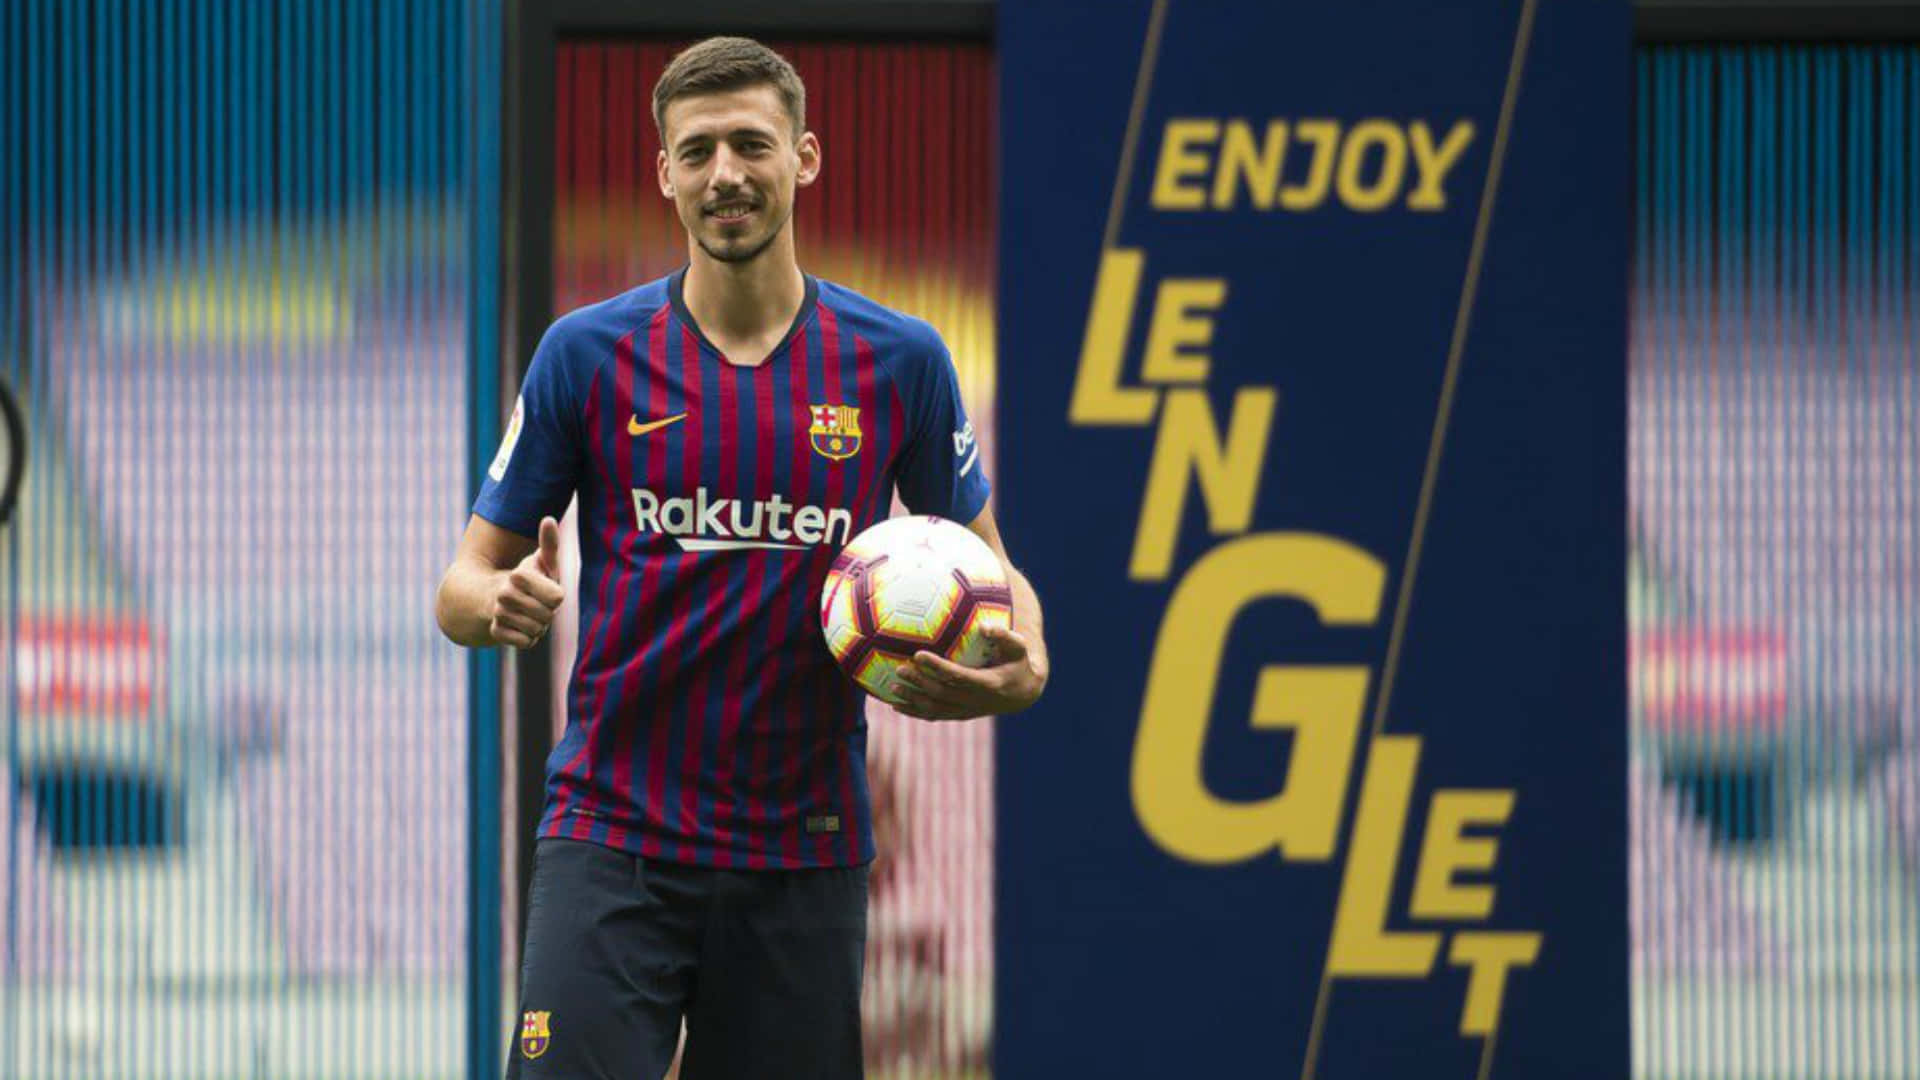 Clément Lenglet In Action On The Soccer Field Wallpaper